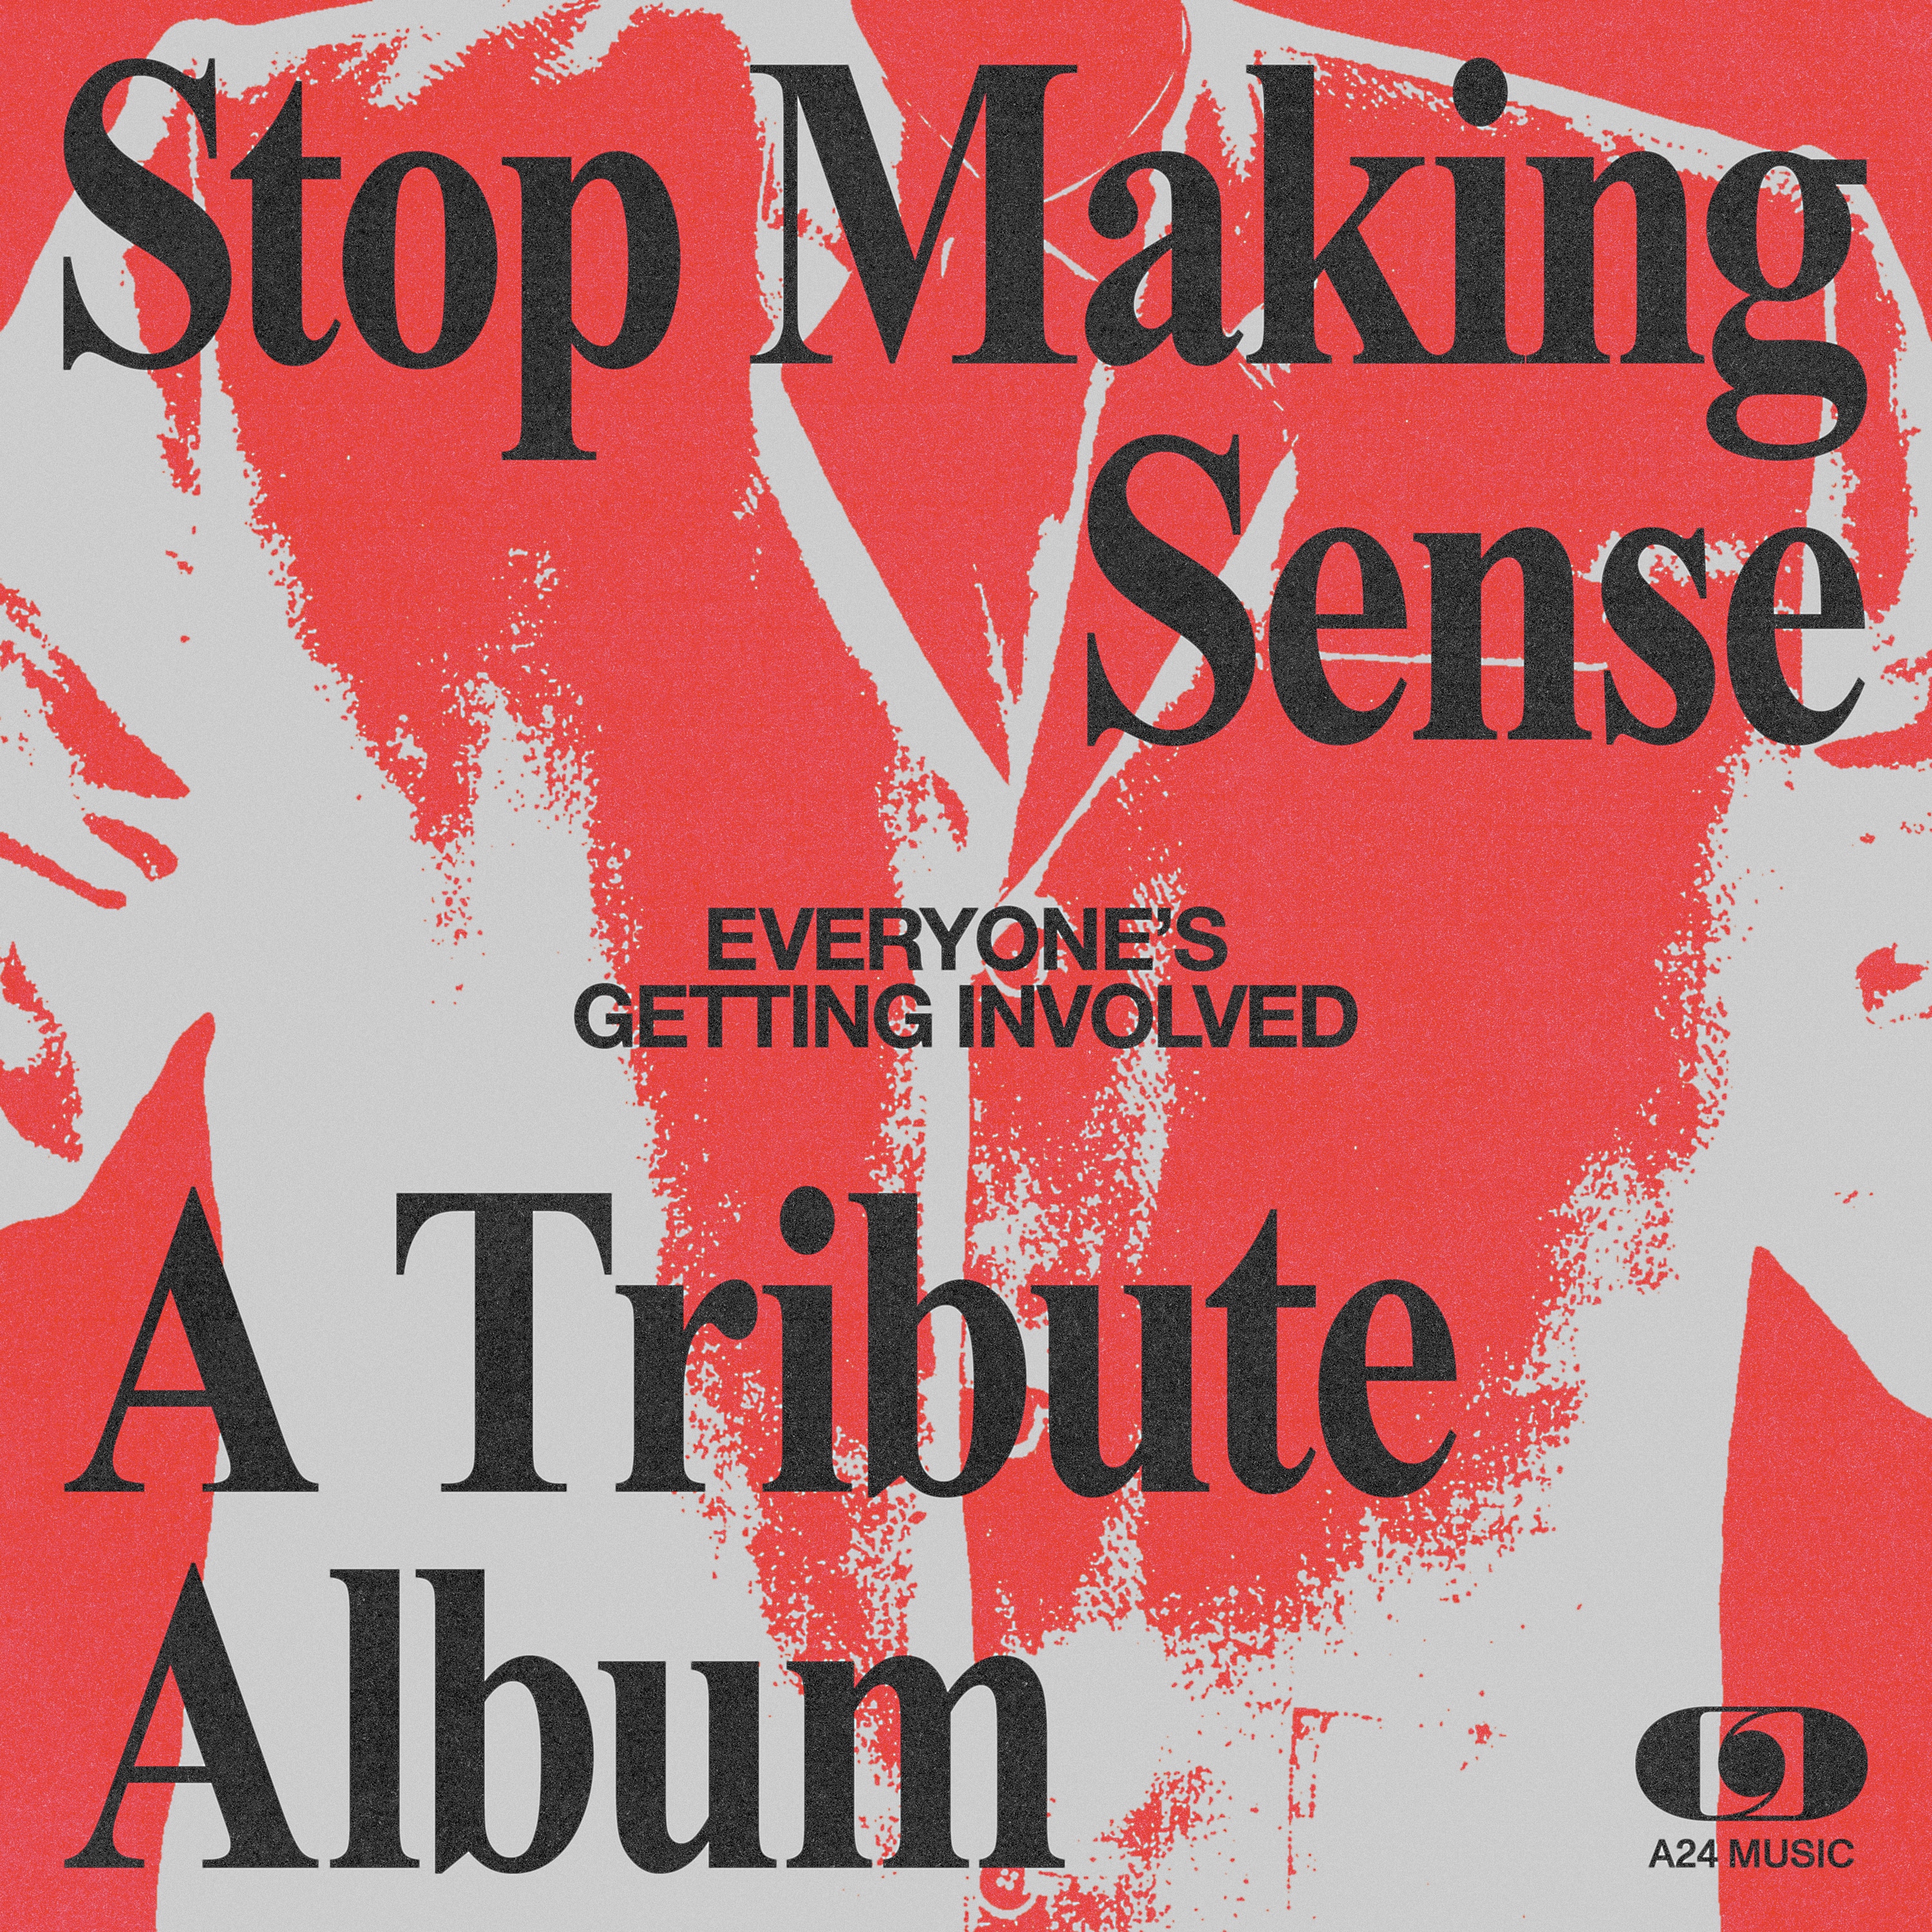 red and grey background with text stop making sense, everyone's getting involved, a tribute album